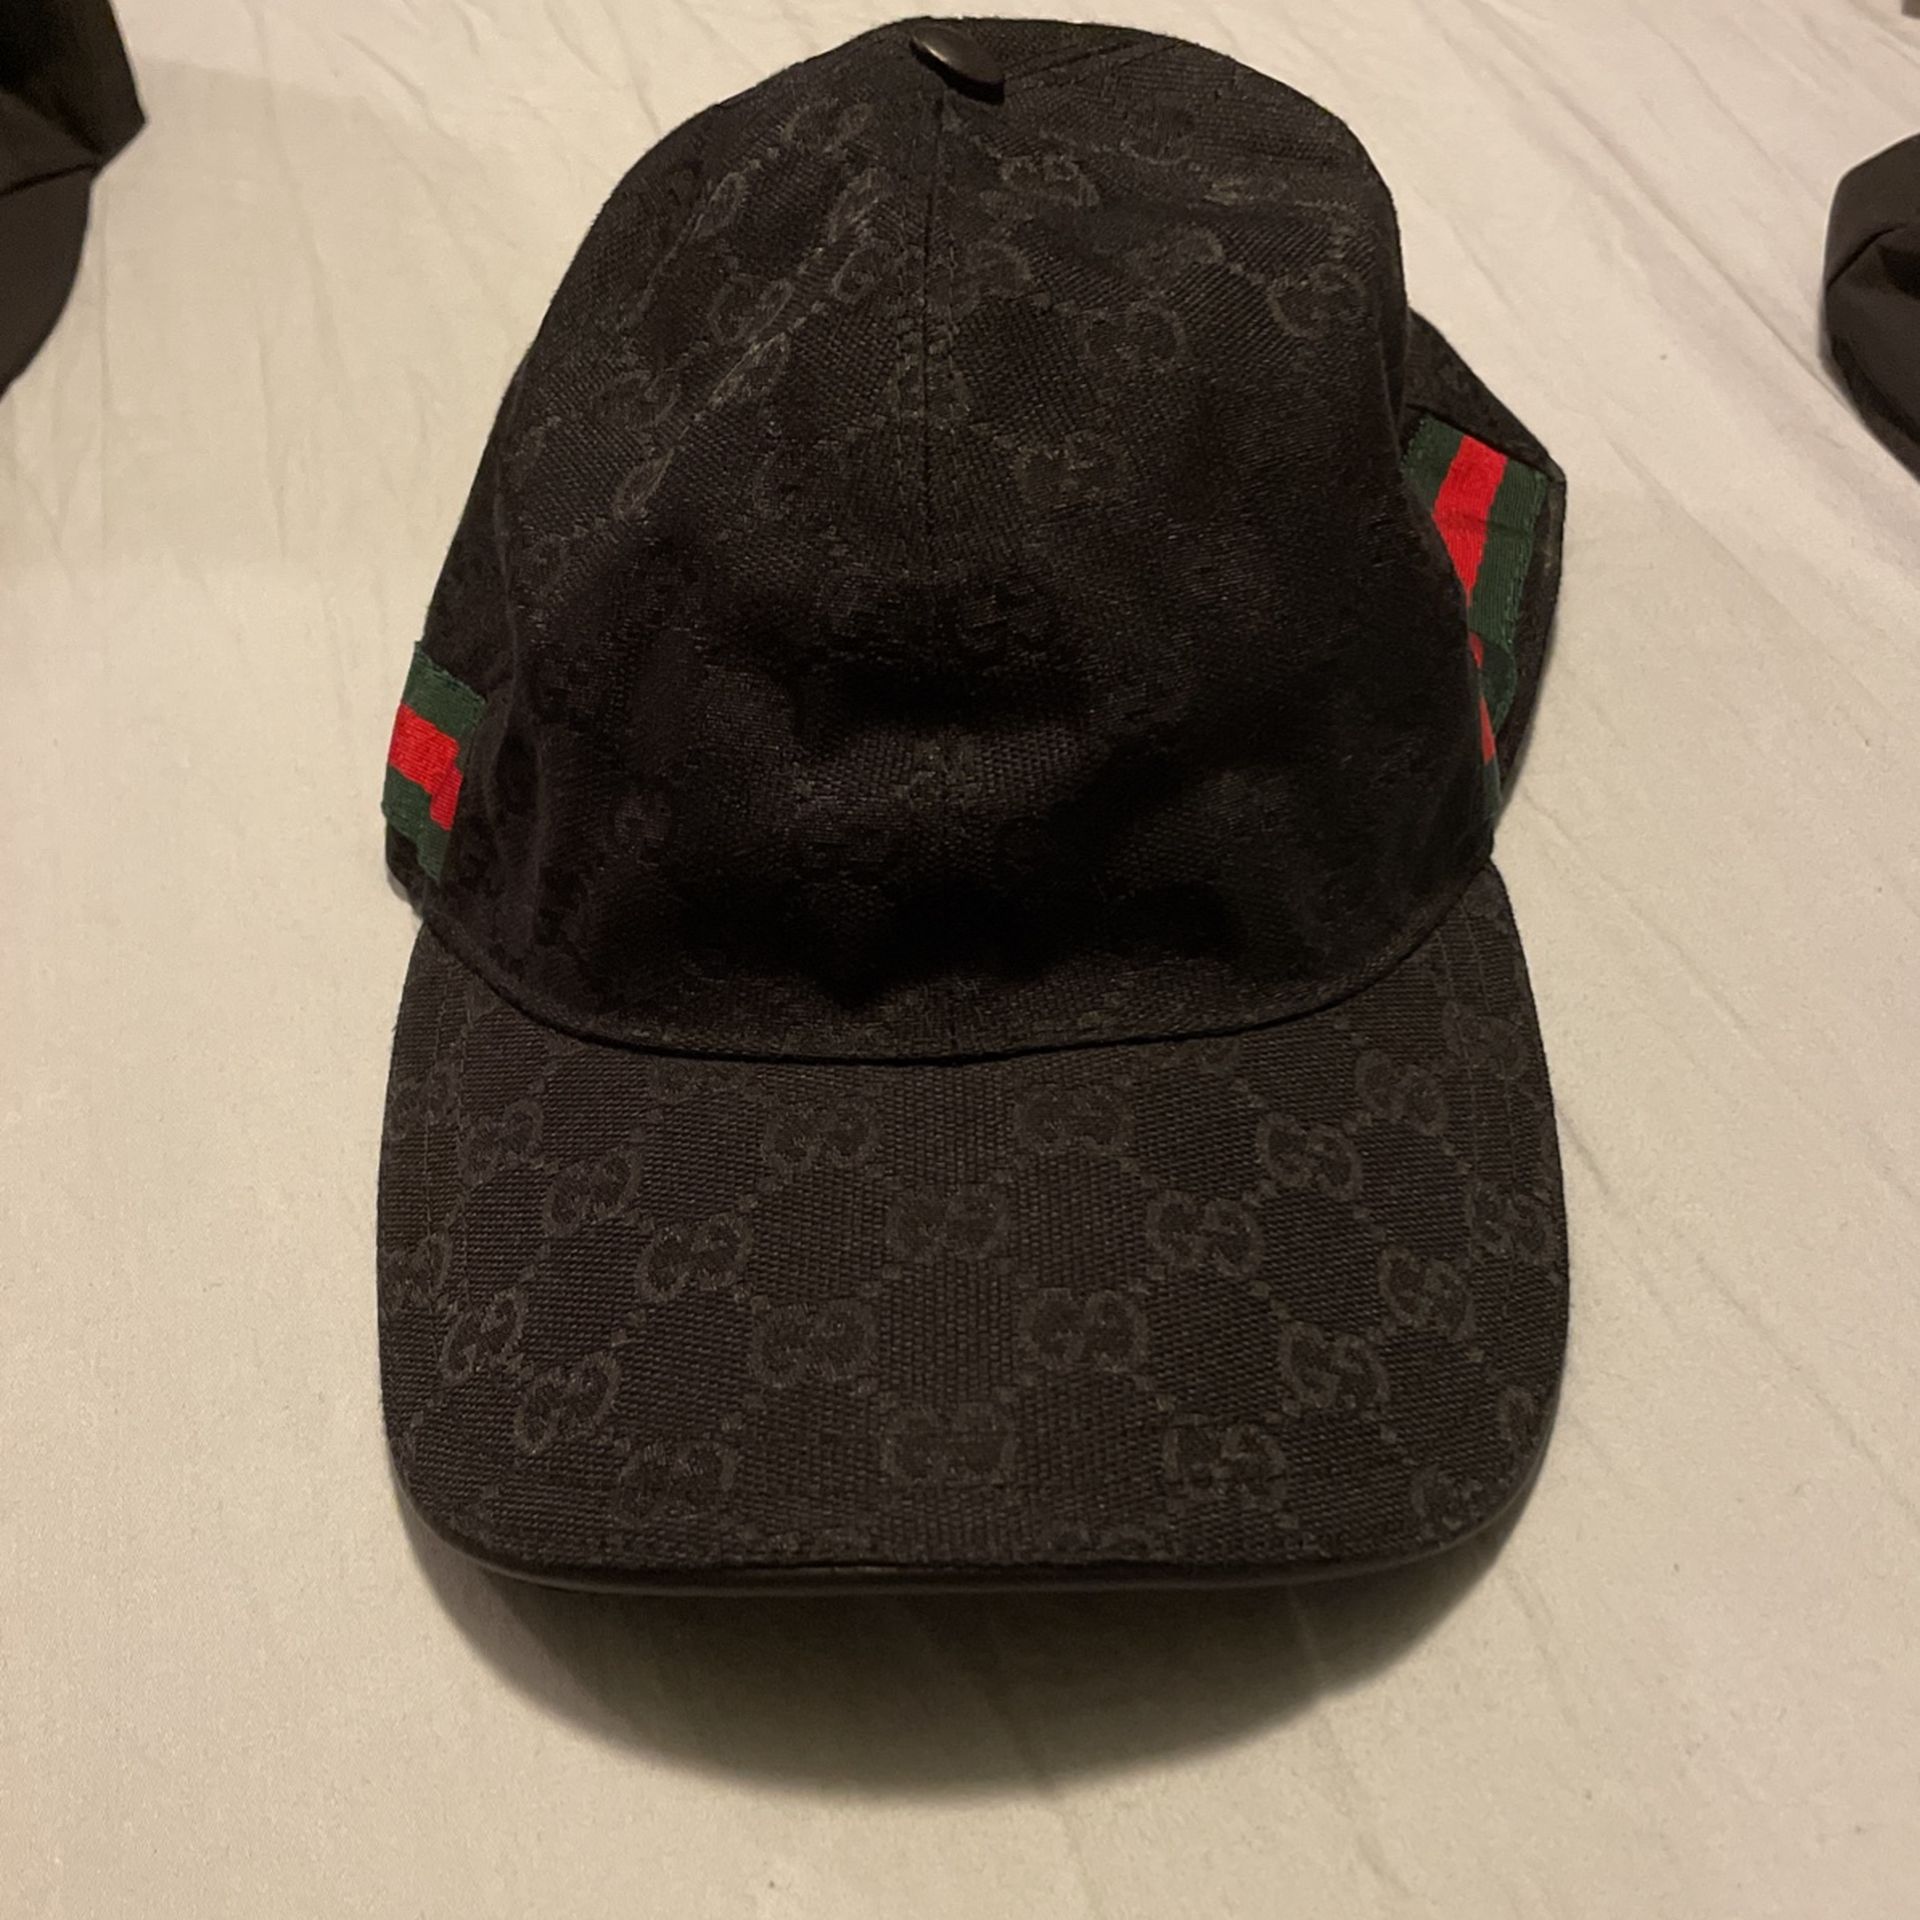 Used Size Xl Gucci Hat